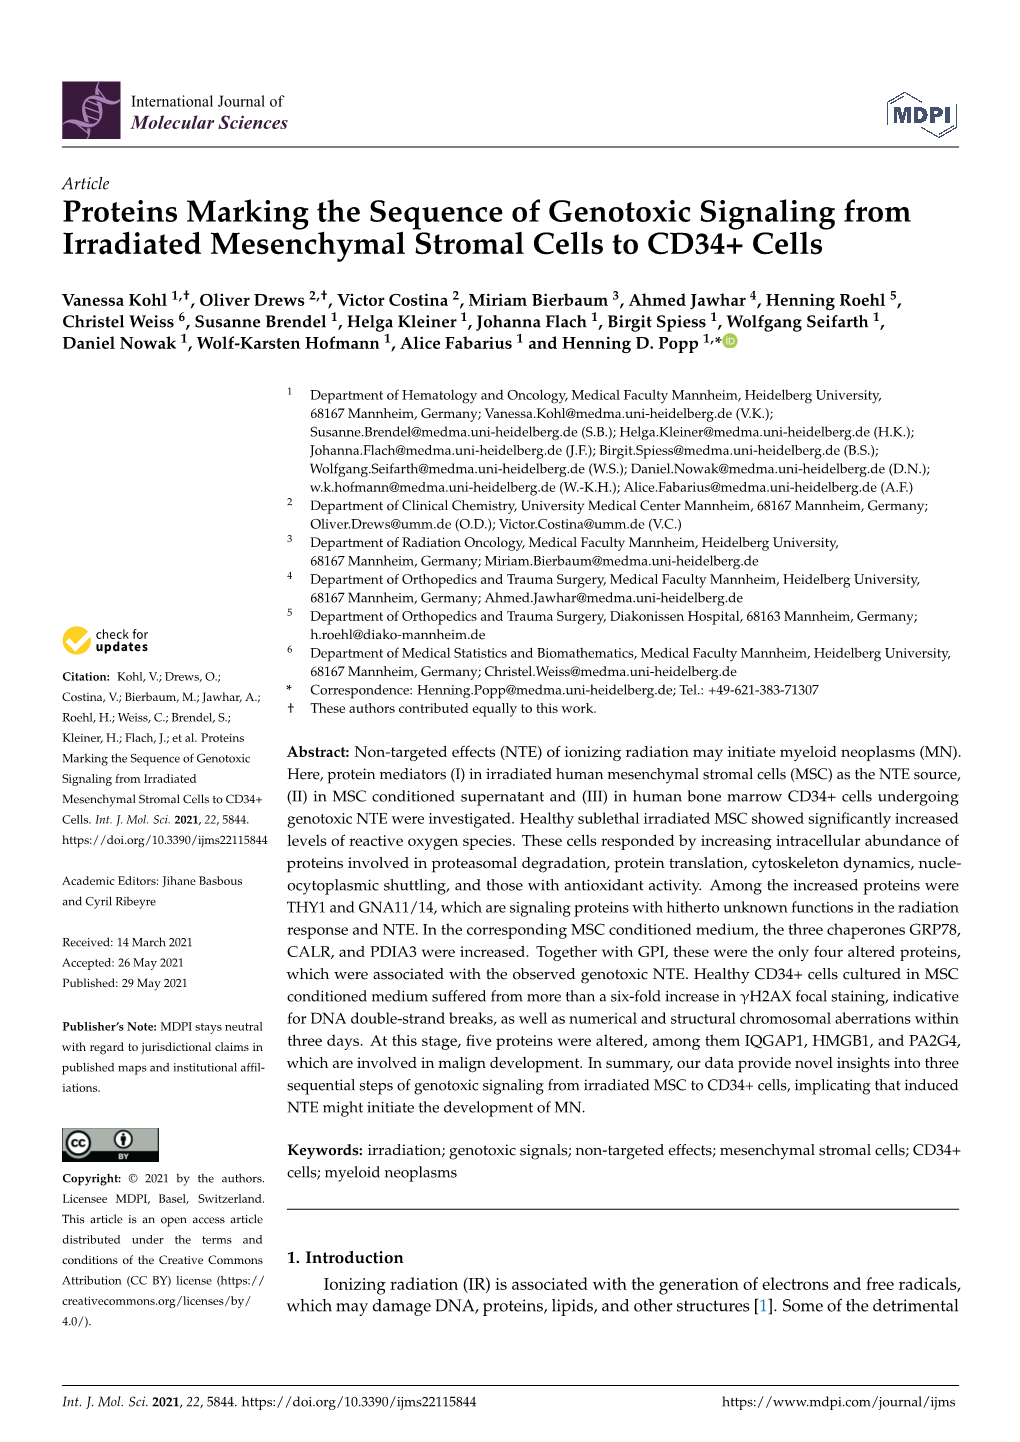 Proteins Marking the Sequence of Genotoxic Signaling from Irradiated Mesenchymal Stromal Cells to CD34+ Cells